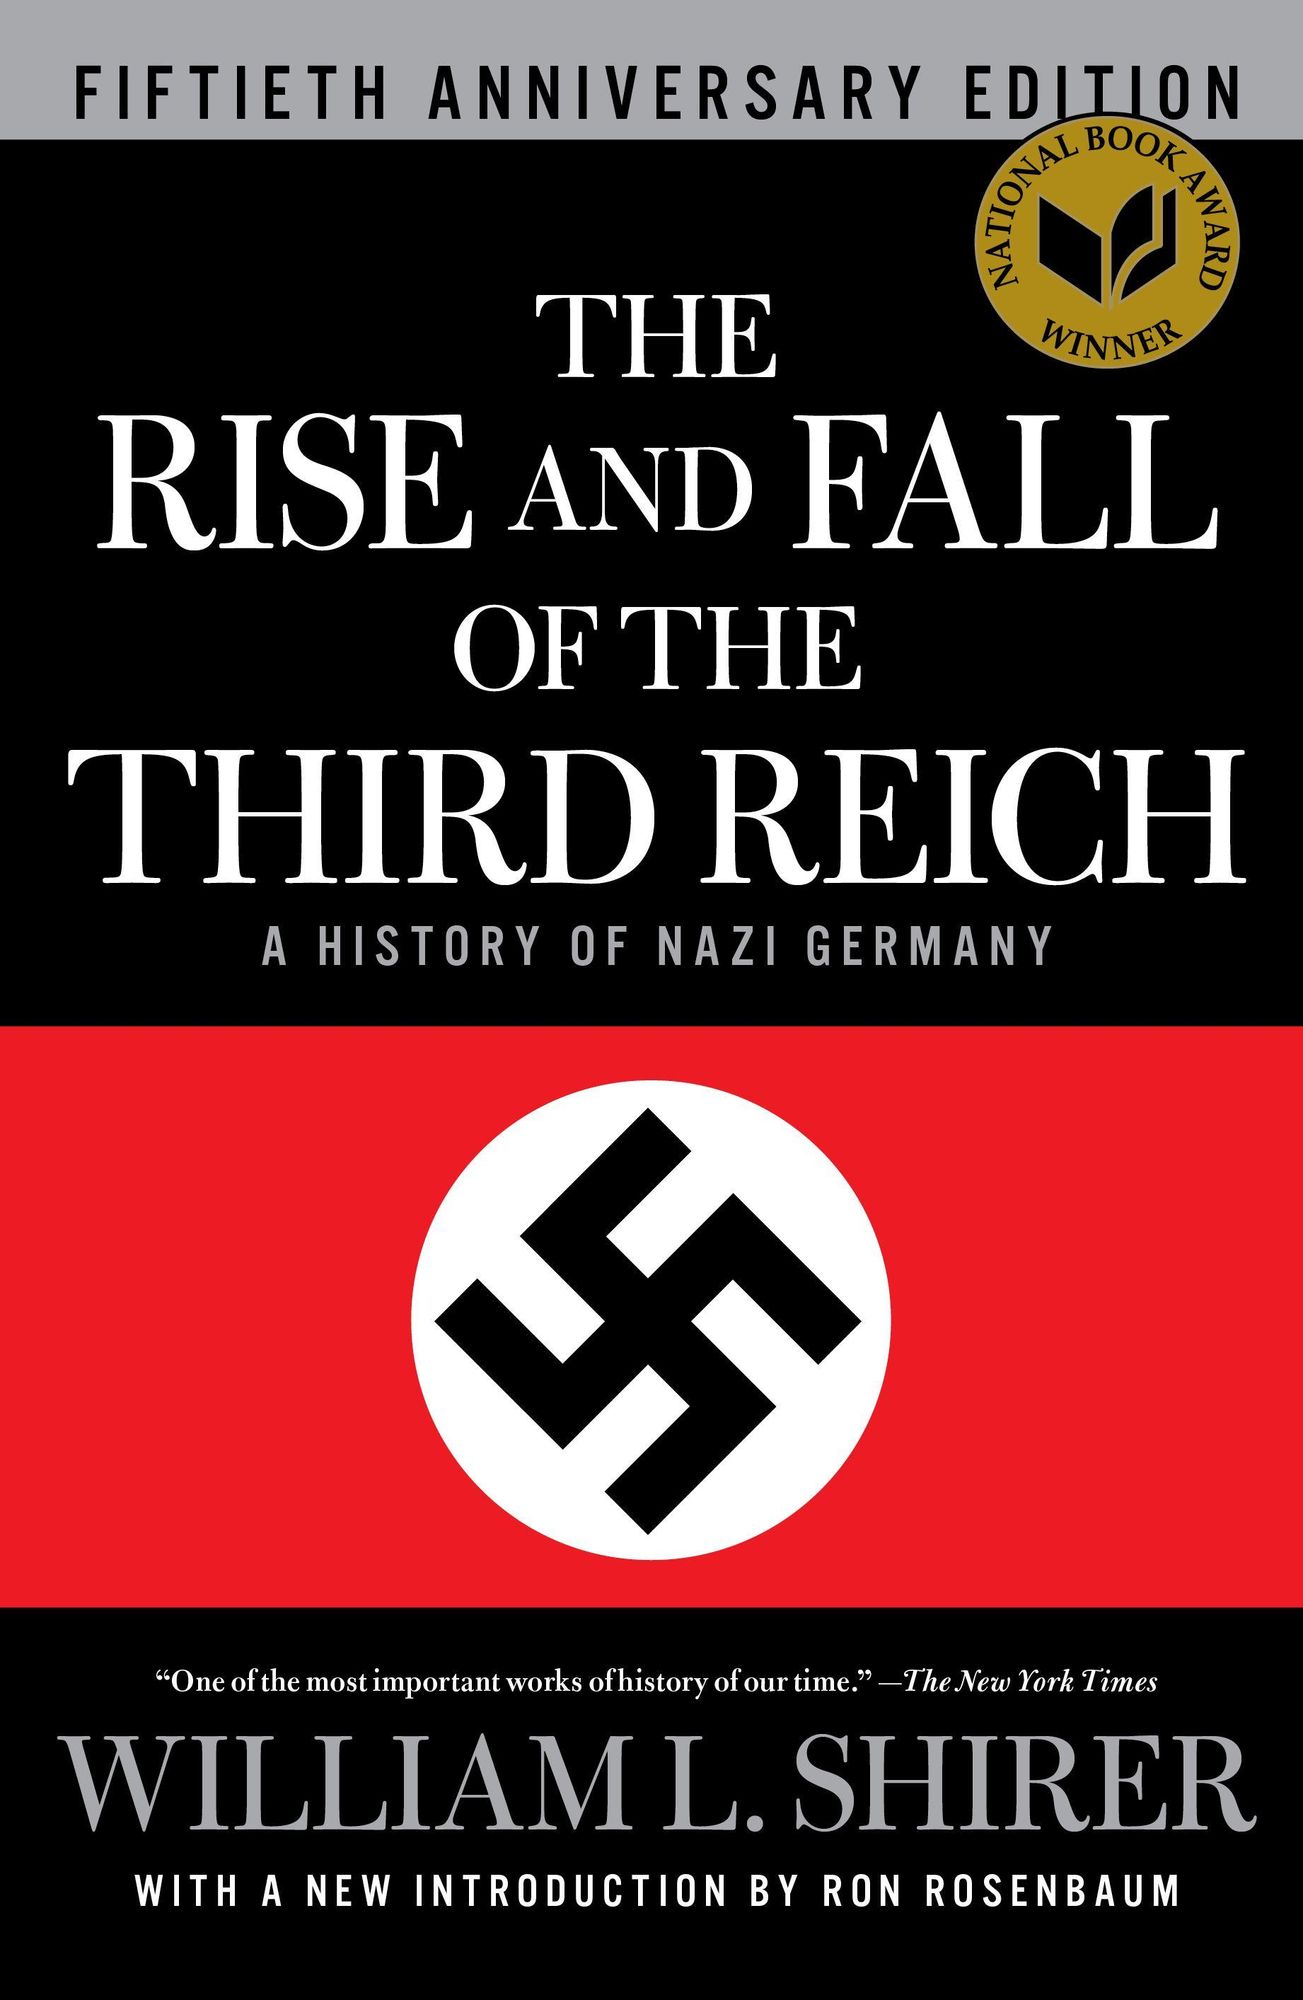 William L. Shirer: The Rise and Fall of the Third Reich (1990, Simon & Schuster)